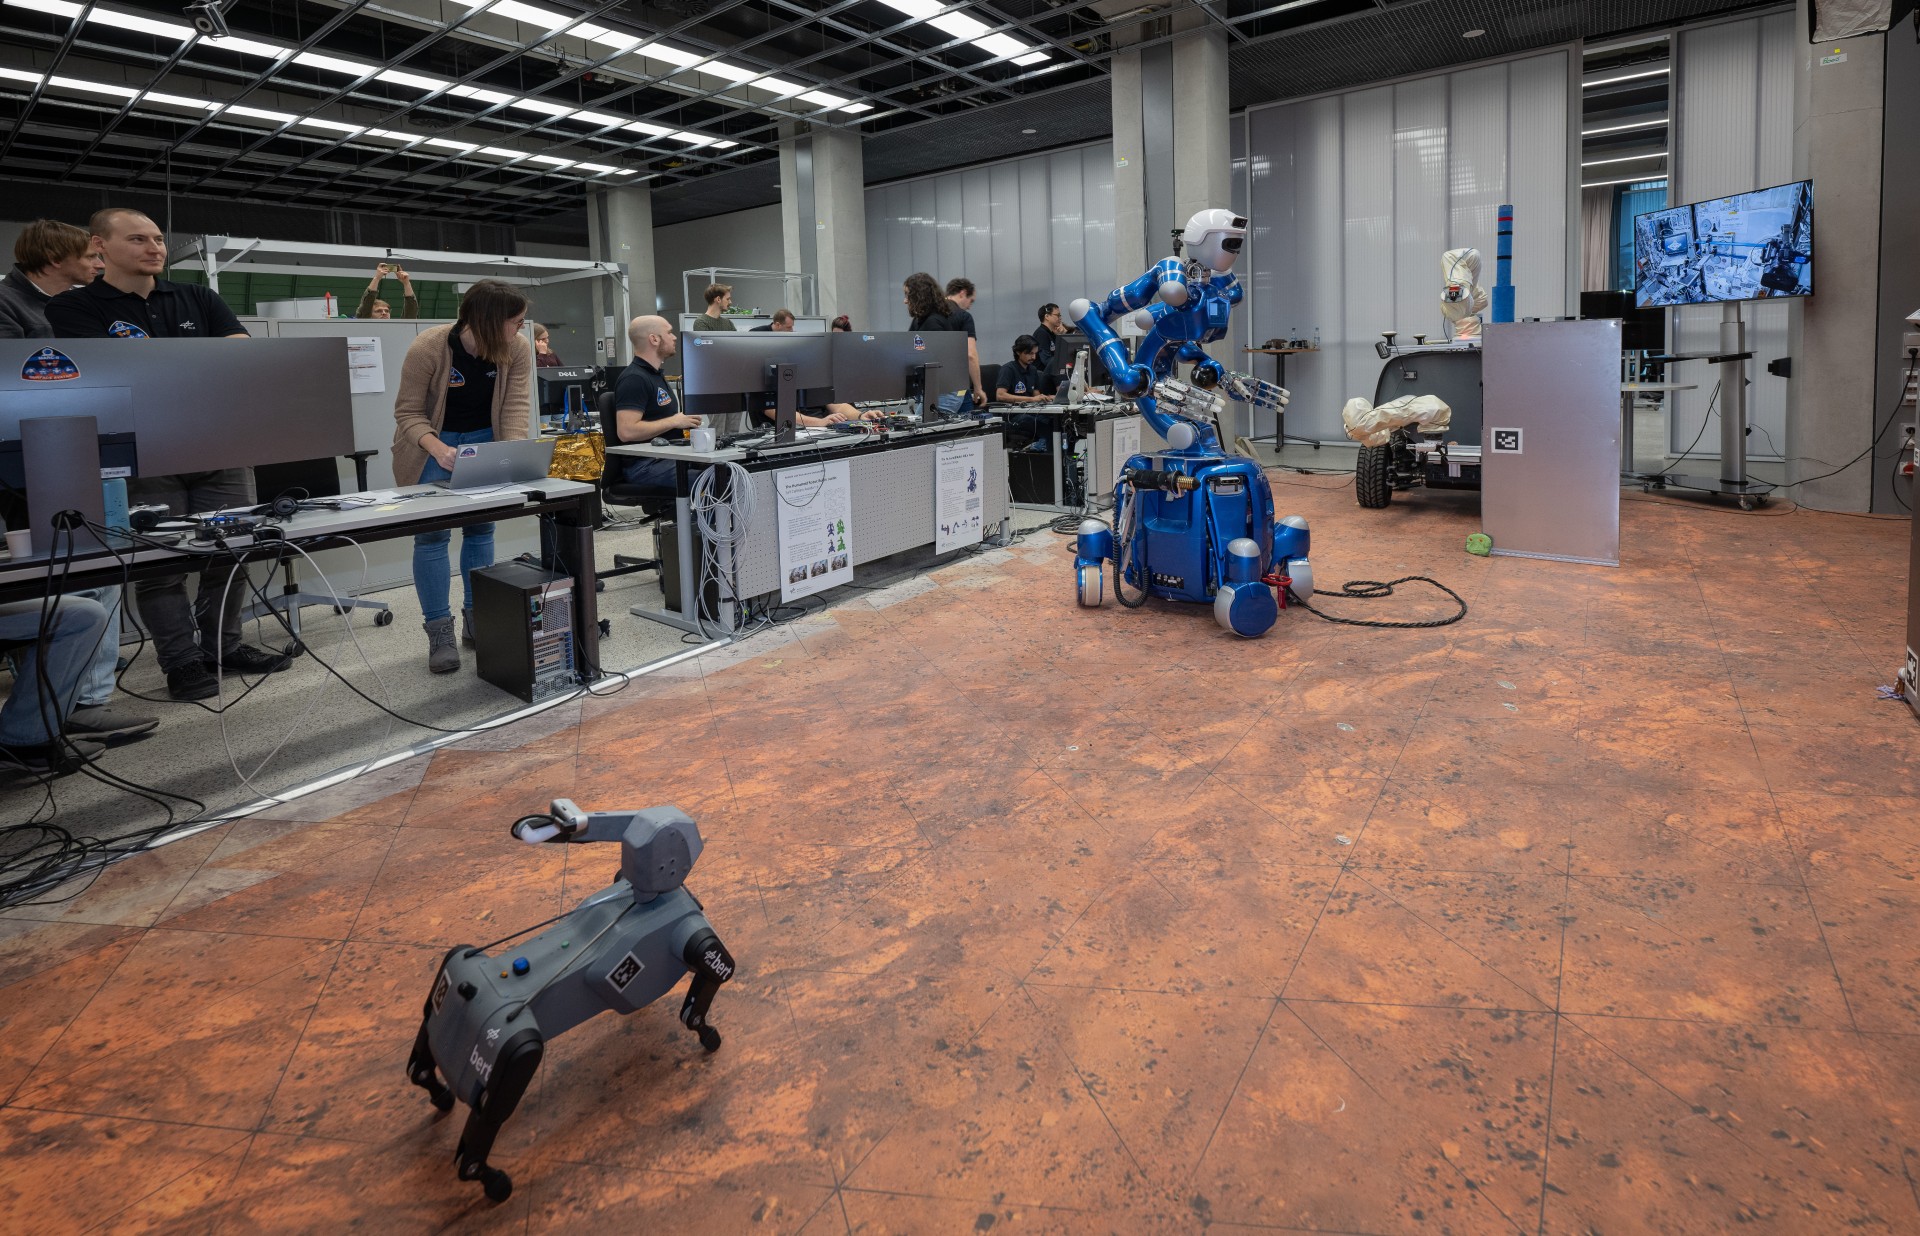 a dog-like robot and a humanoid robot on wheels roll around a laboratory surrounded by scientists in t-shirts standing at computers